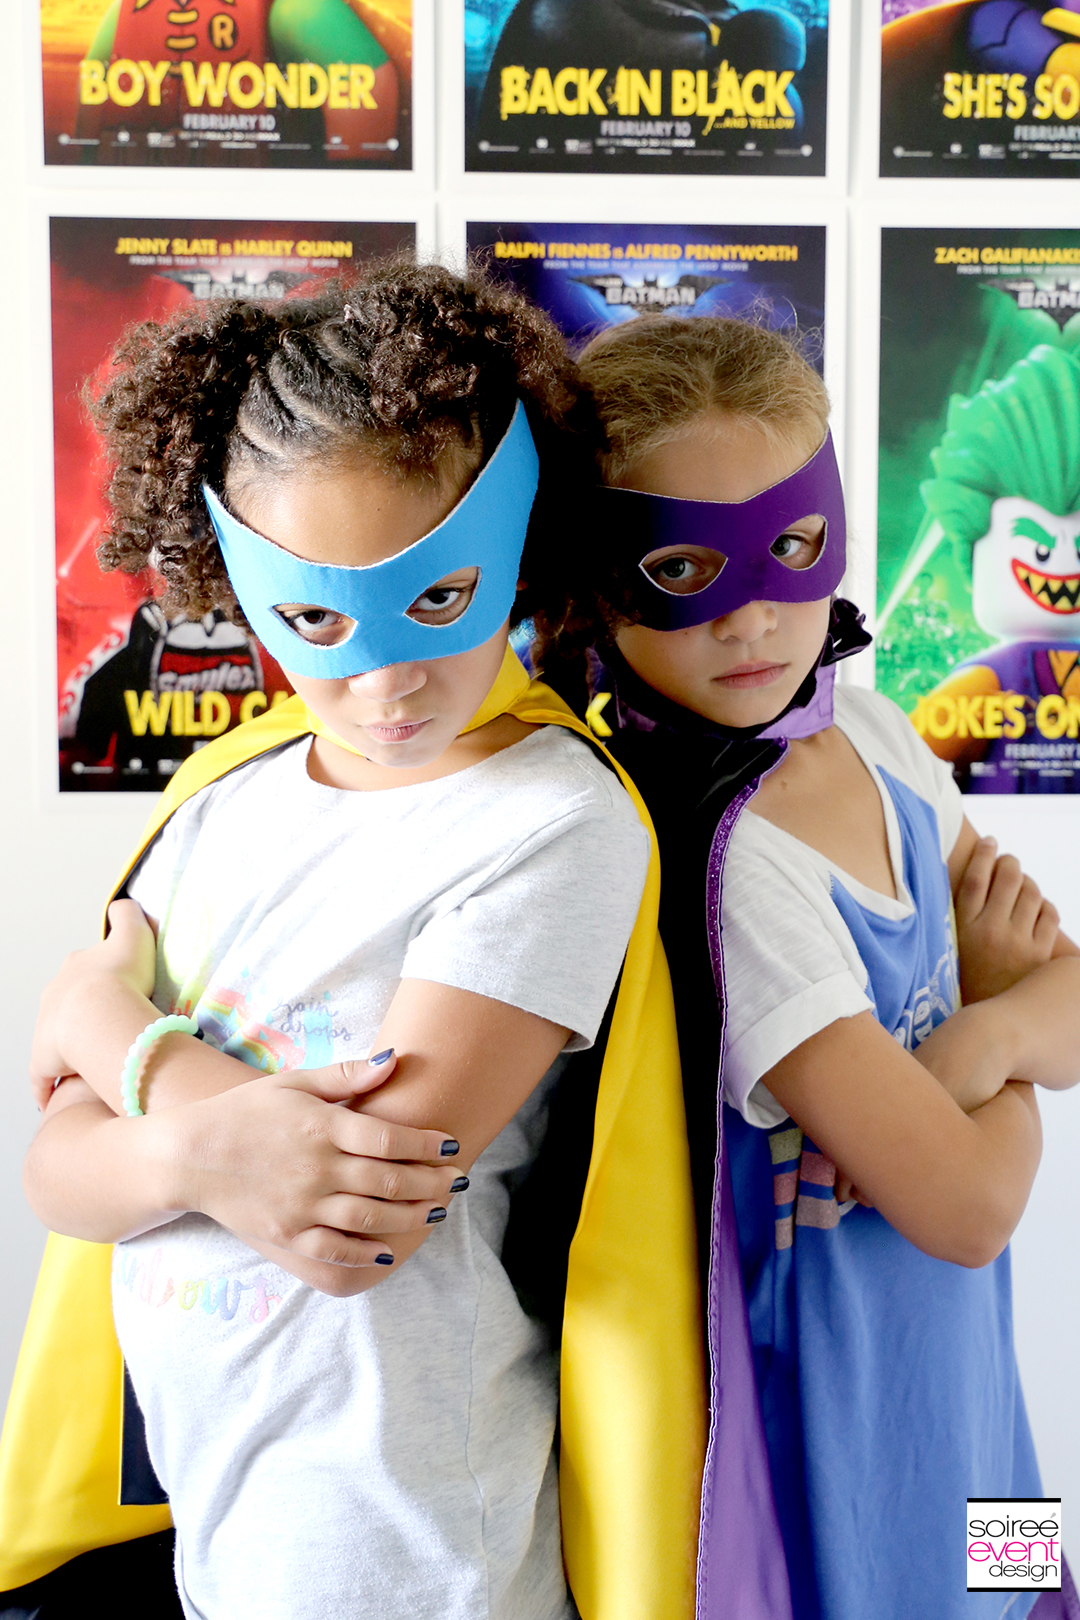 Lego Batman Party Photo Booth - Superhero Costumes for Girls 2